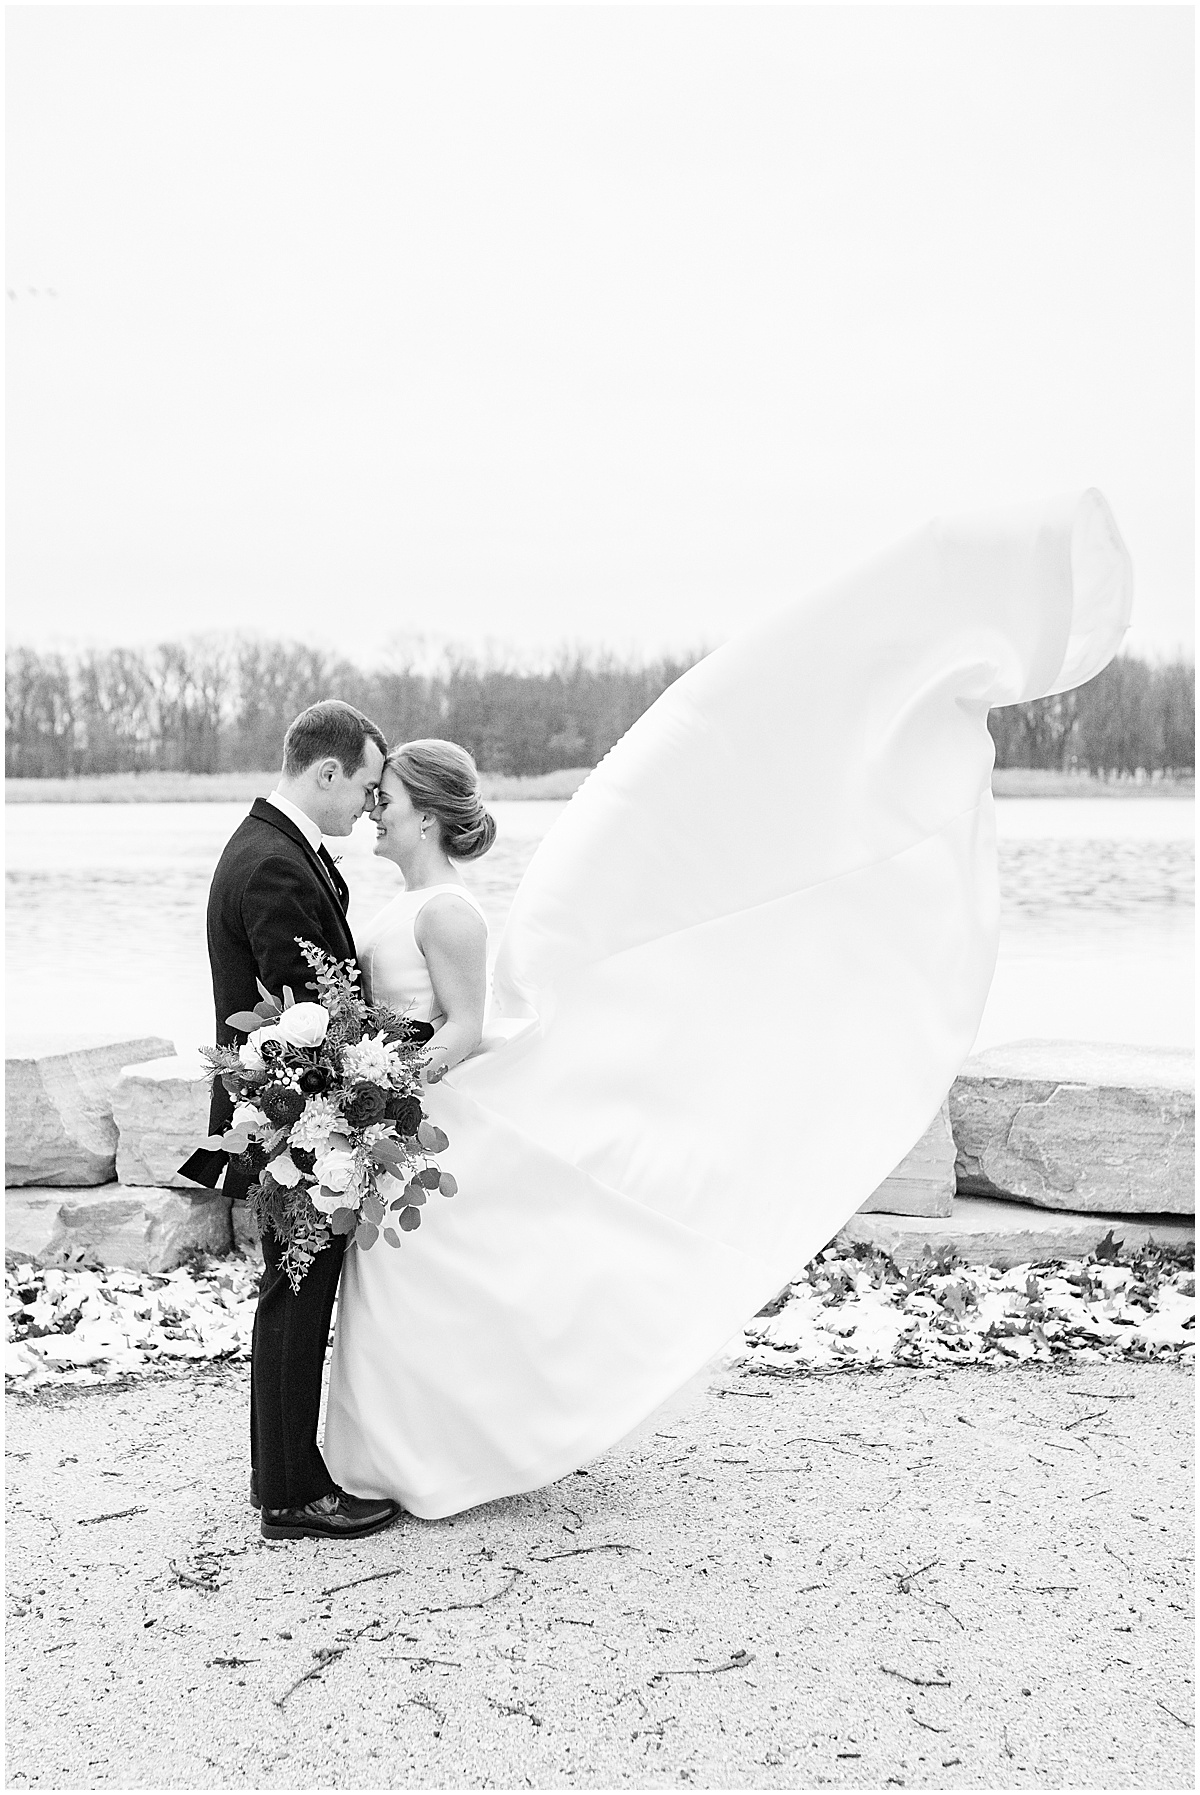 Bridal gown blows in wind after Allure on the Lake wedding in Chesterton, Indiana